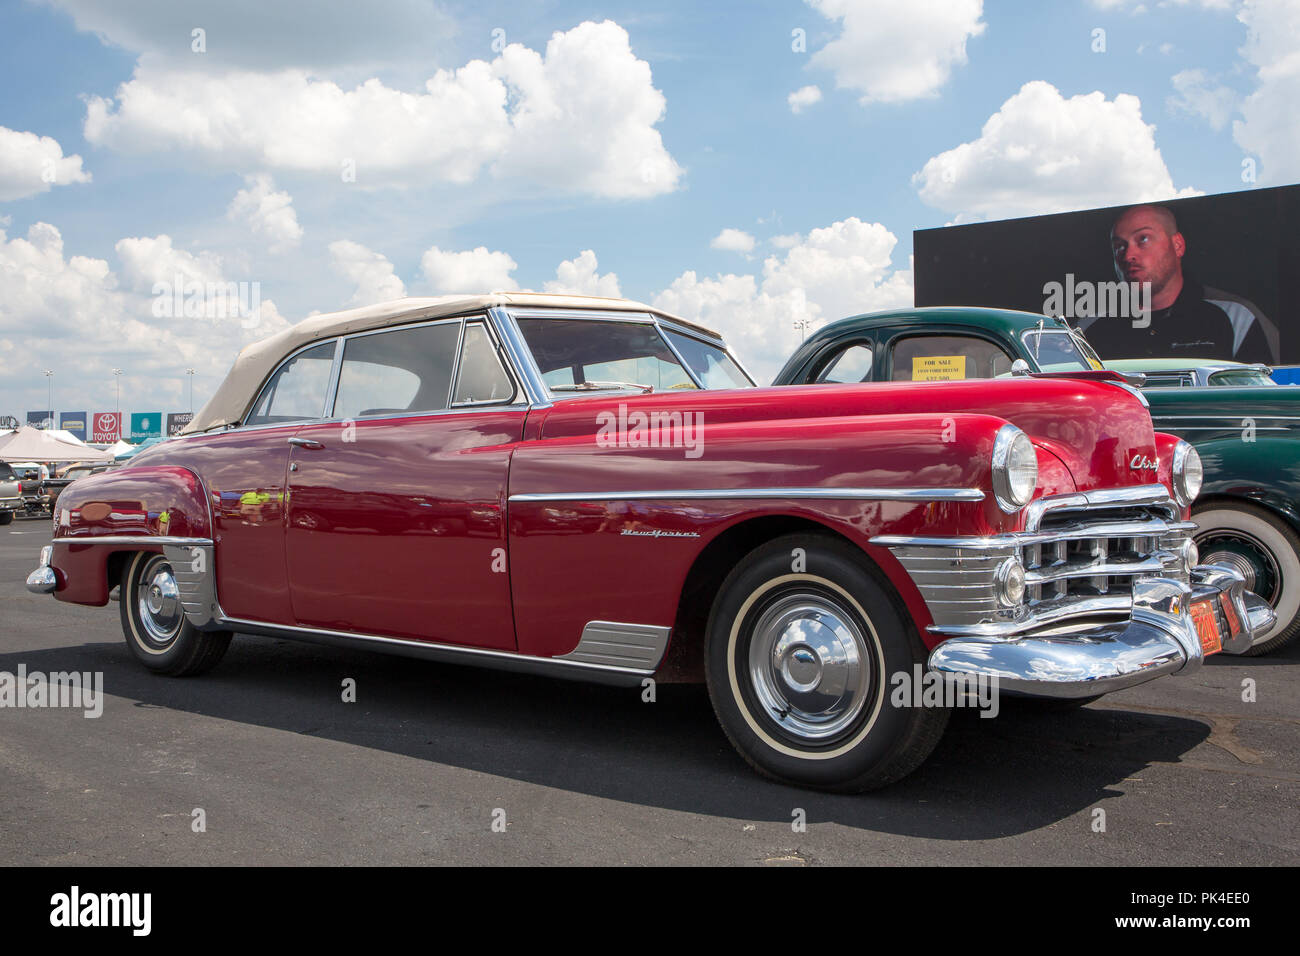 CONCORD, NC (USA) - September 7, 2018:  A 1950 Chrysler New Yorker on display at the Pennzoil AutoFair classic car show at Charlotte Motor Speedway. Stock Photo